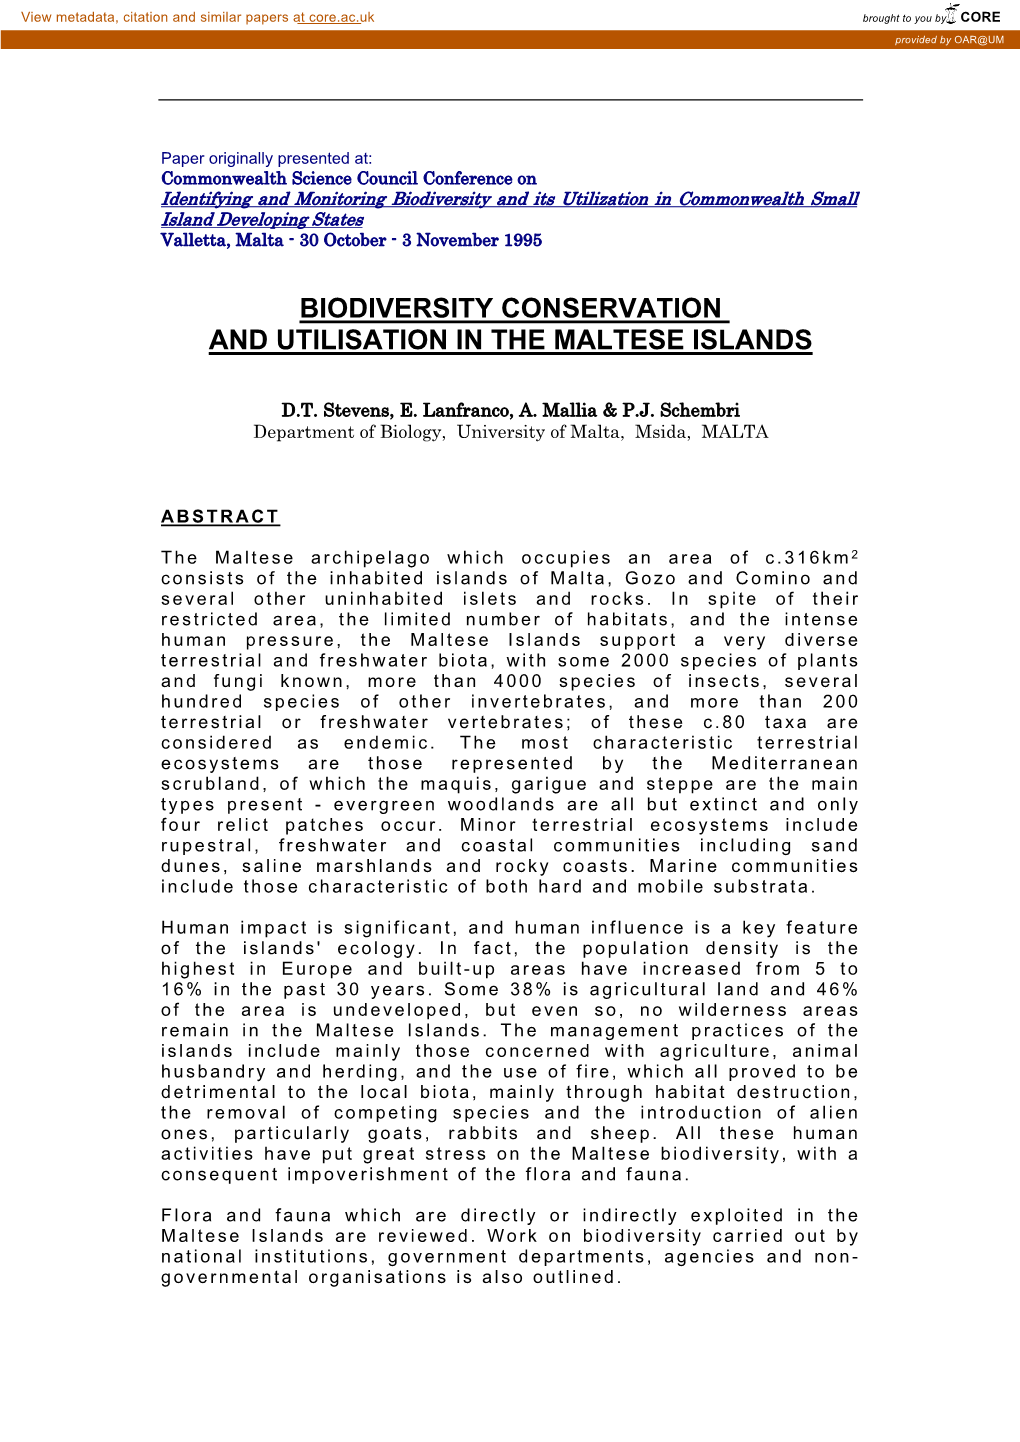 Biodiversity Conservation and Utilisation in the Maltese Islands